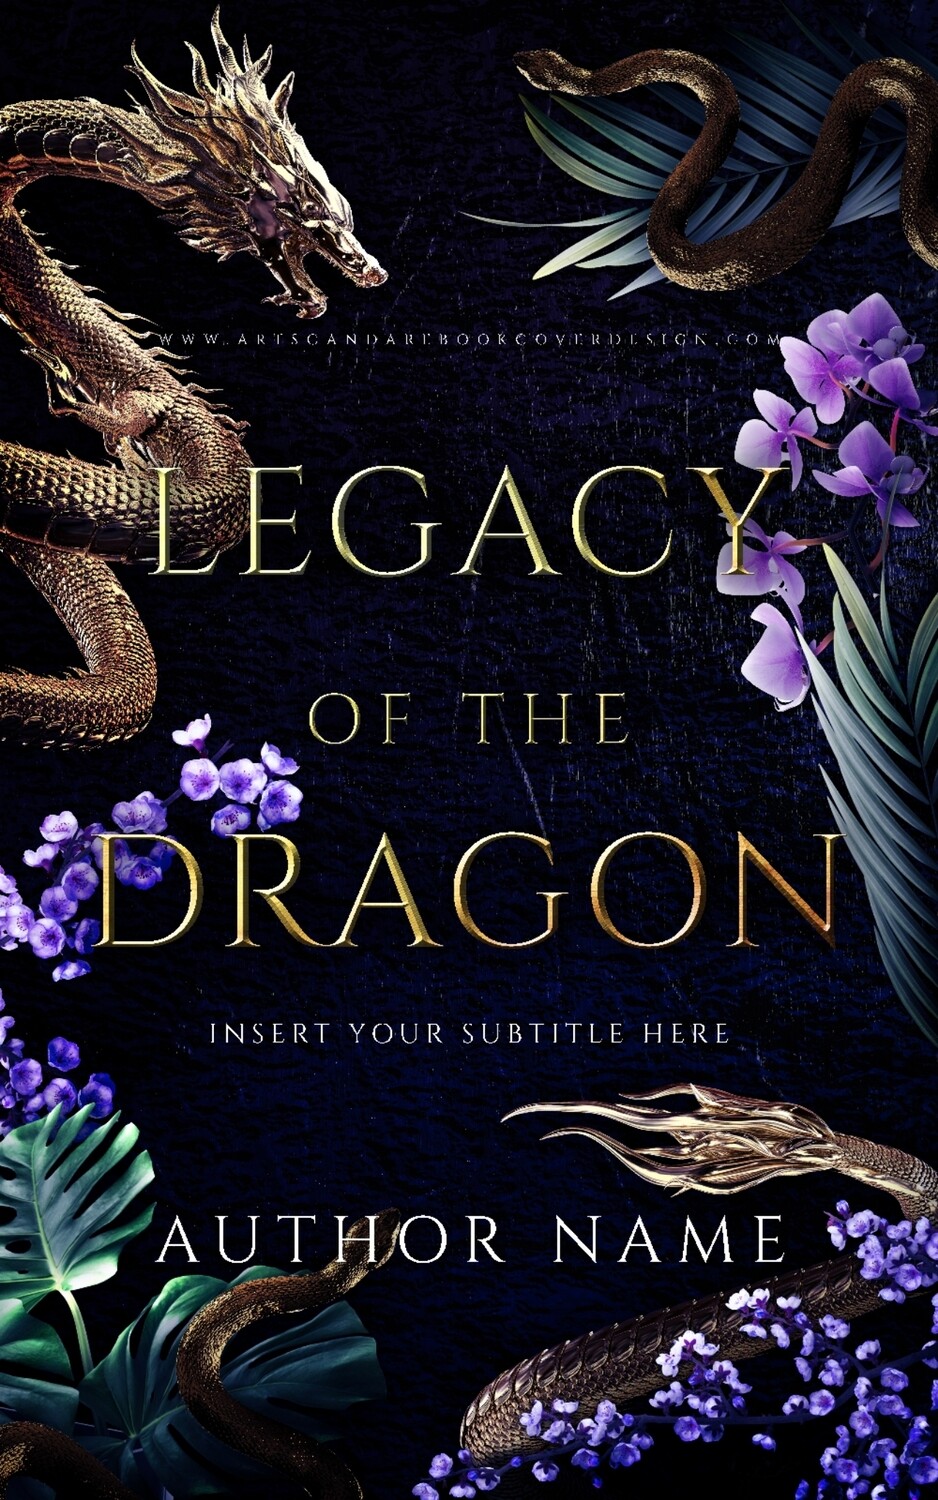 Ebook: Legacy of the Dragon Trilogy